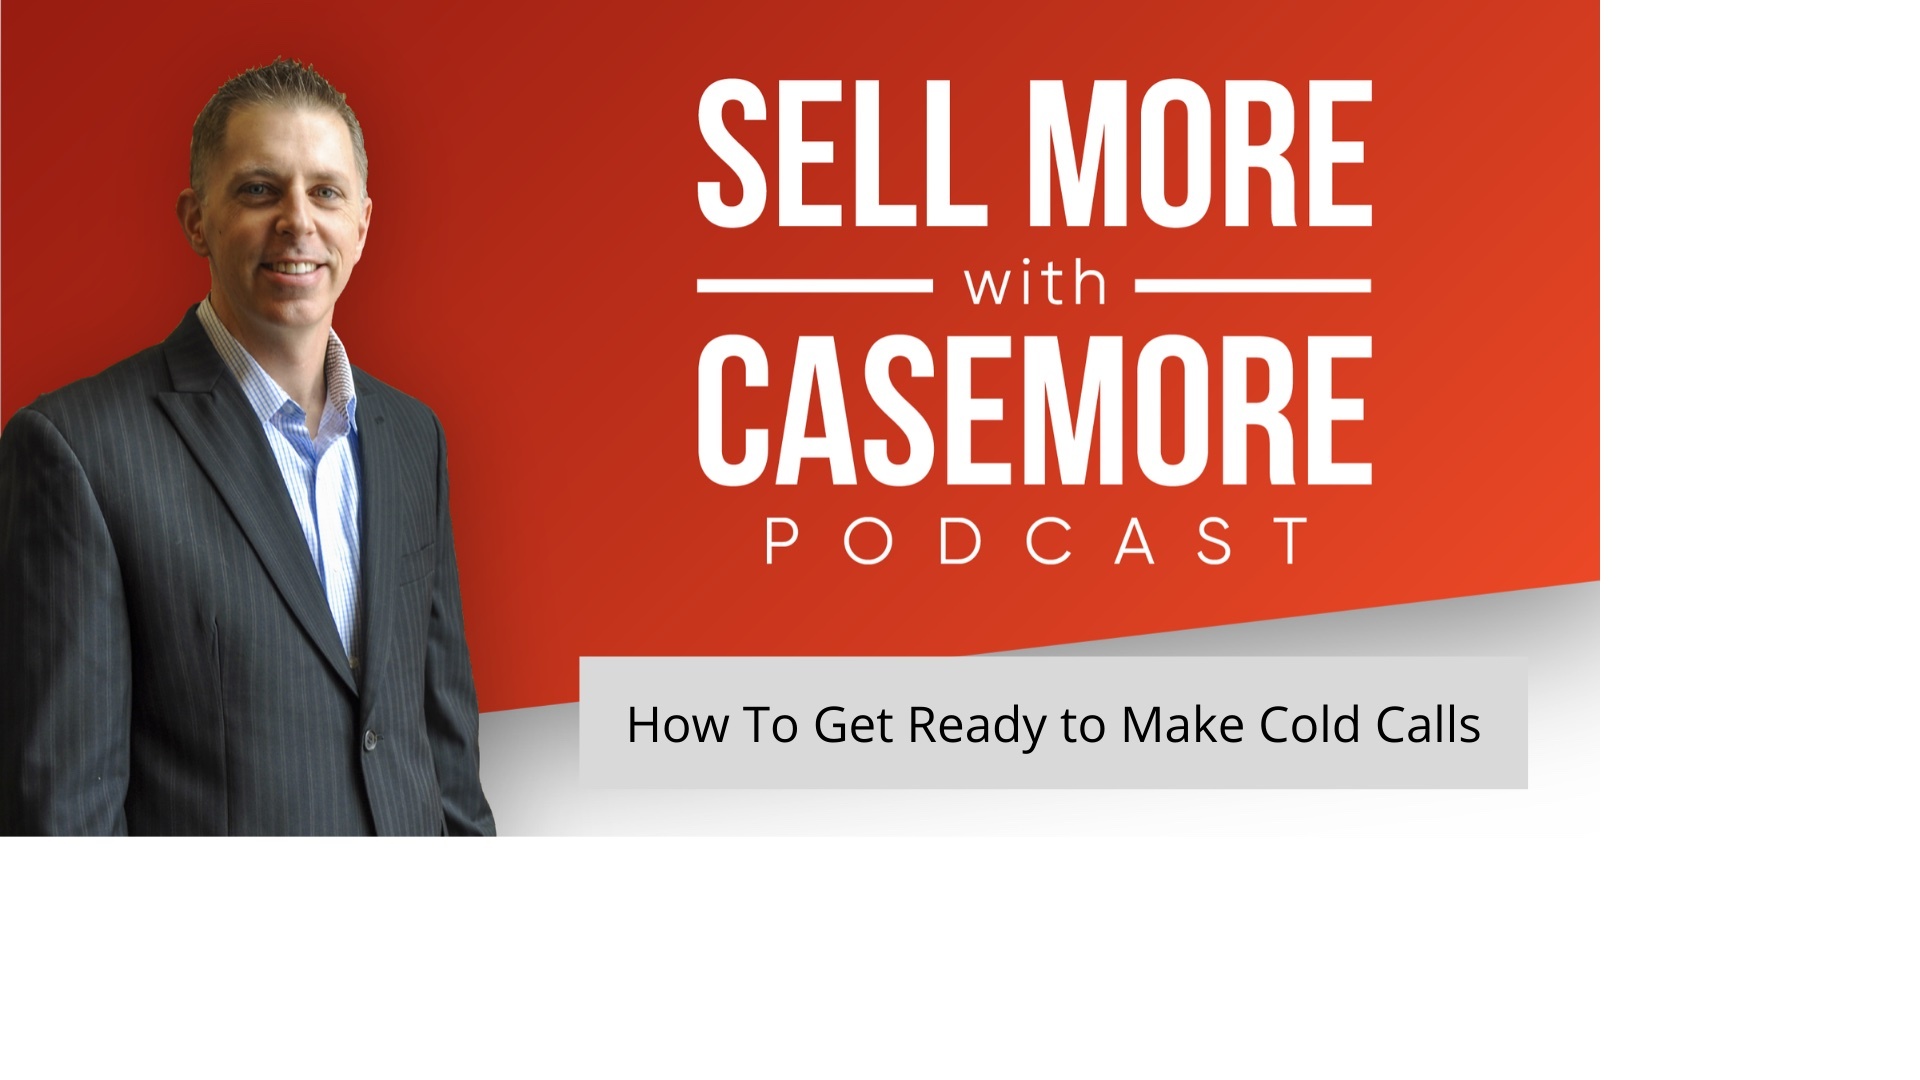 How to get ready to make cold calls